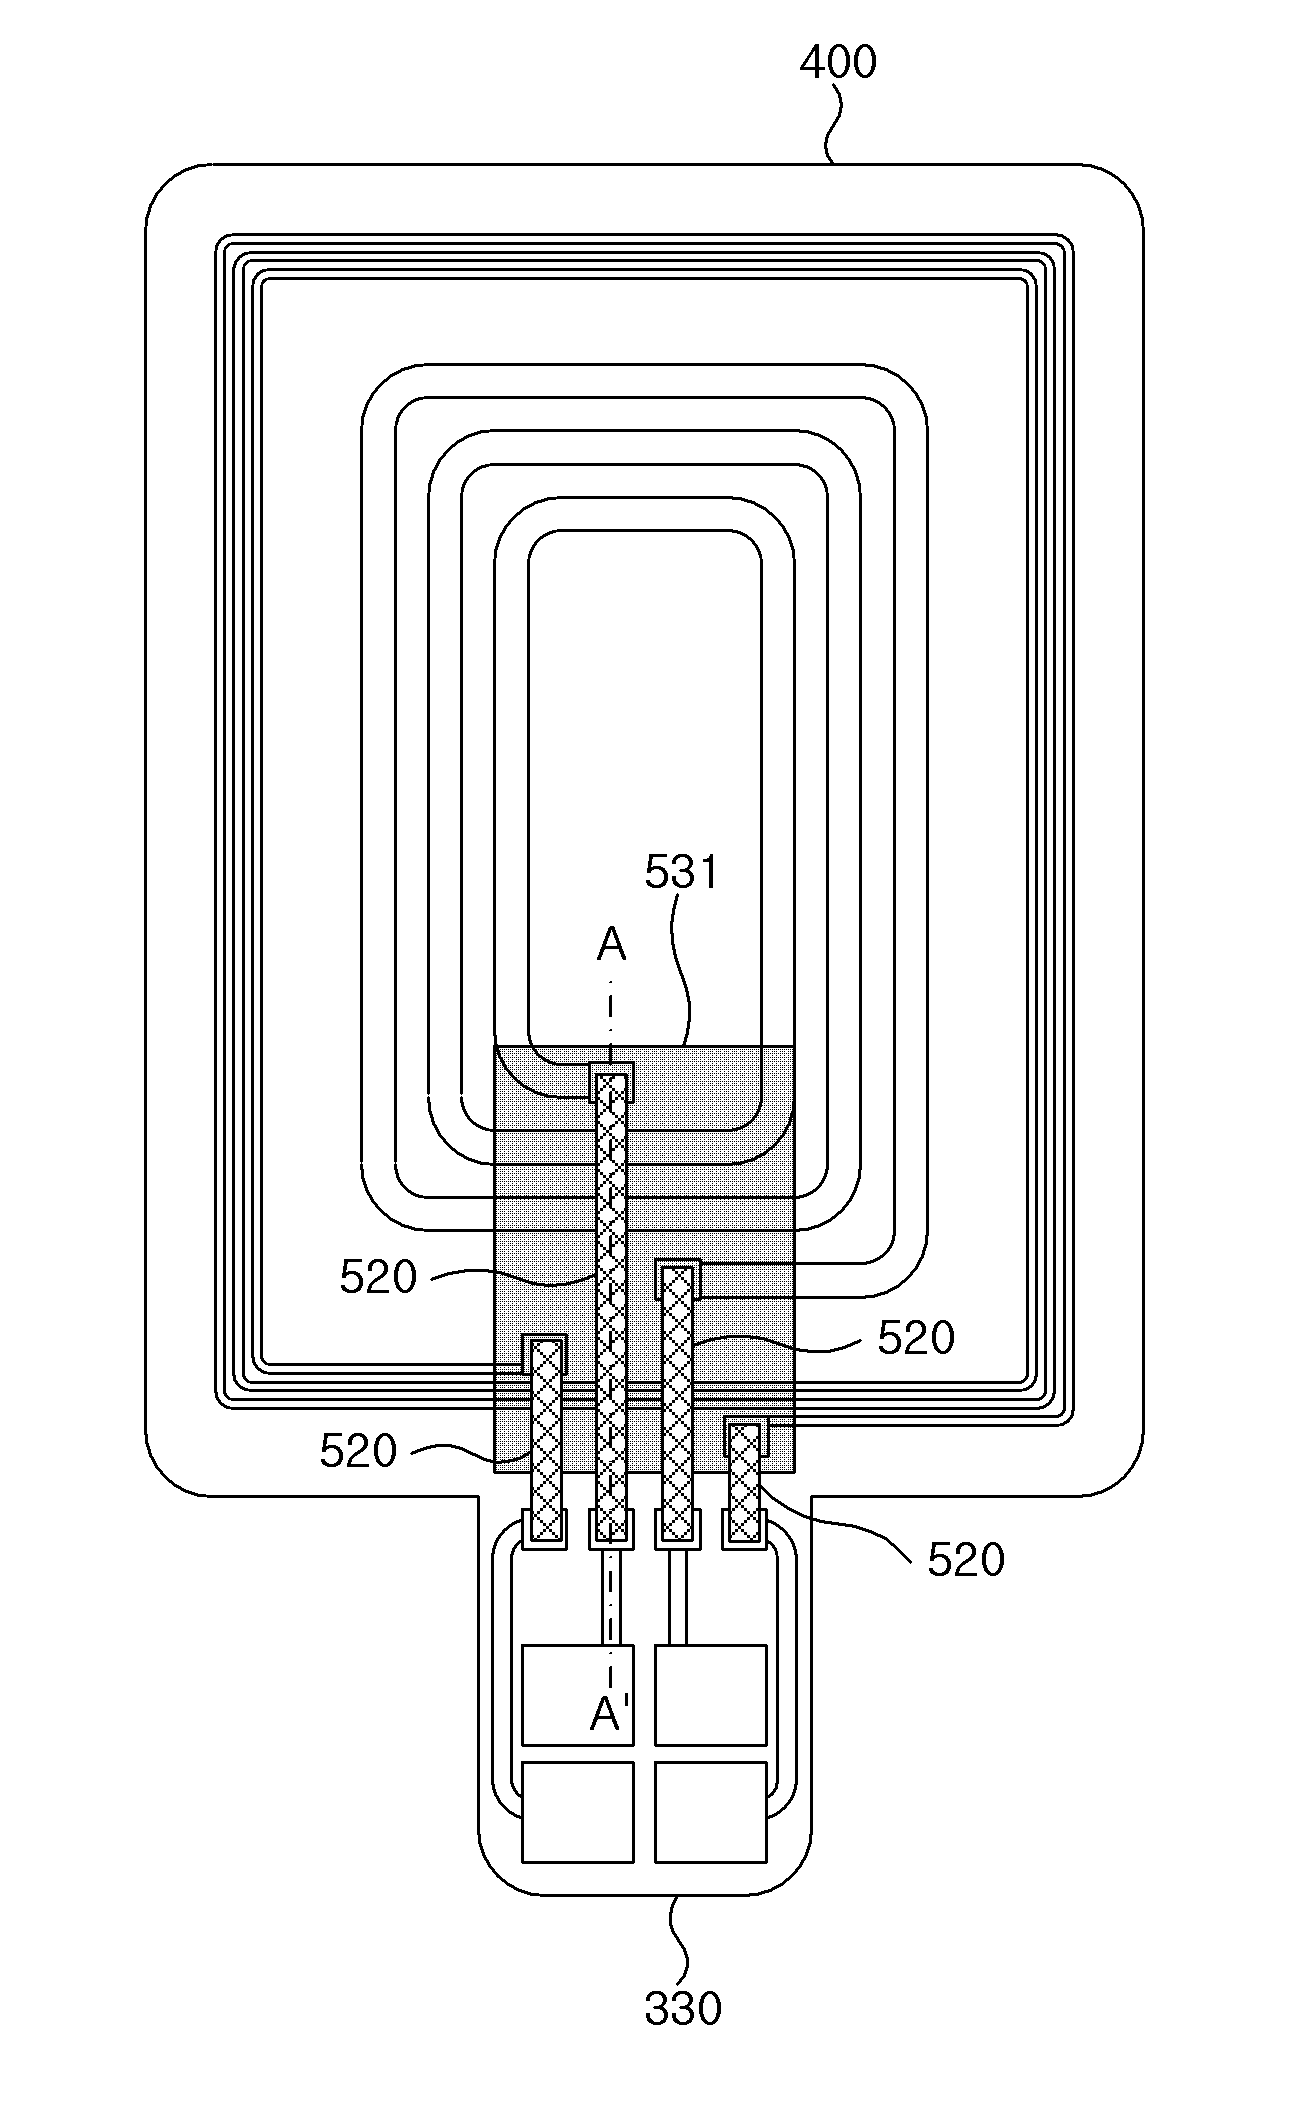 Antenna assembly and method for manufacturing same